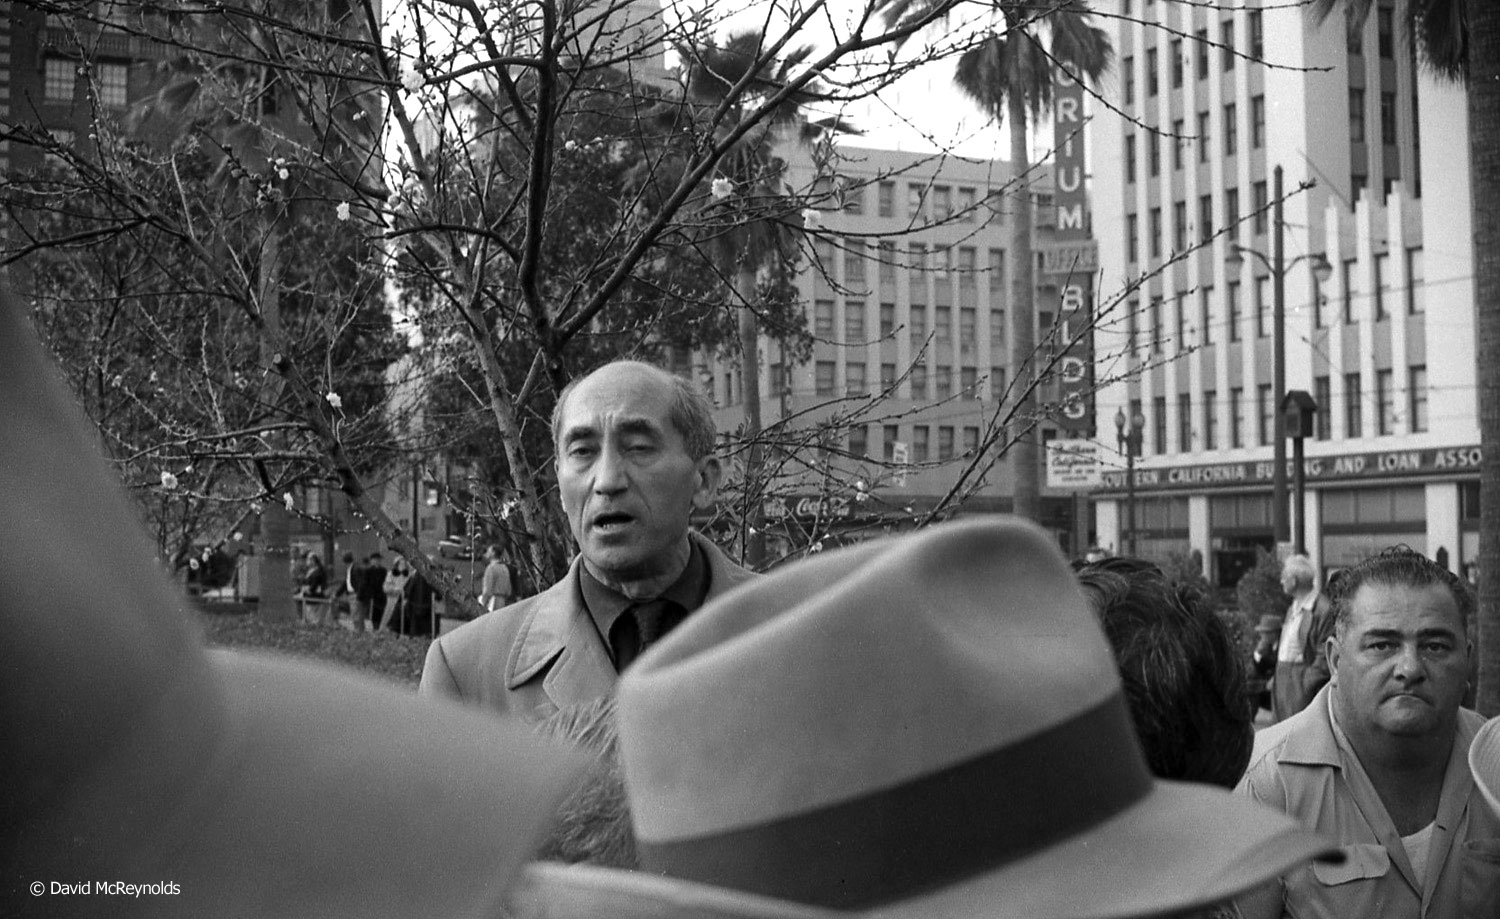  Irwin Edelman in Pershing Square, Los Angeles, March 1955.   The Nation  magazine described him as "an indefatigable pamphleteer and soapbox orator." (55-3) 